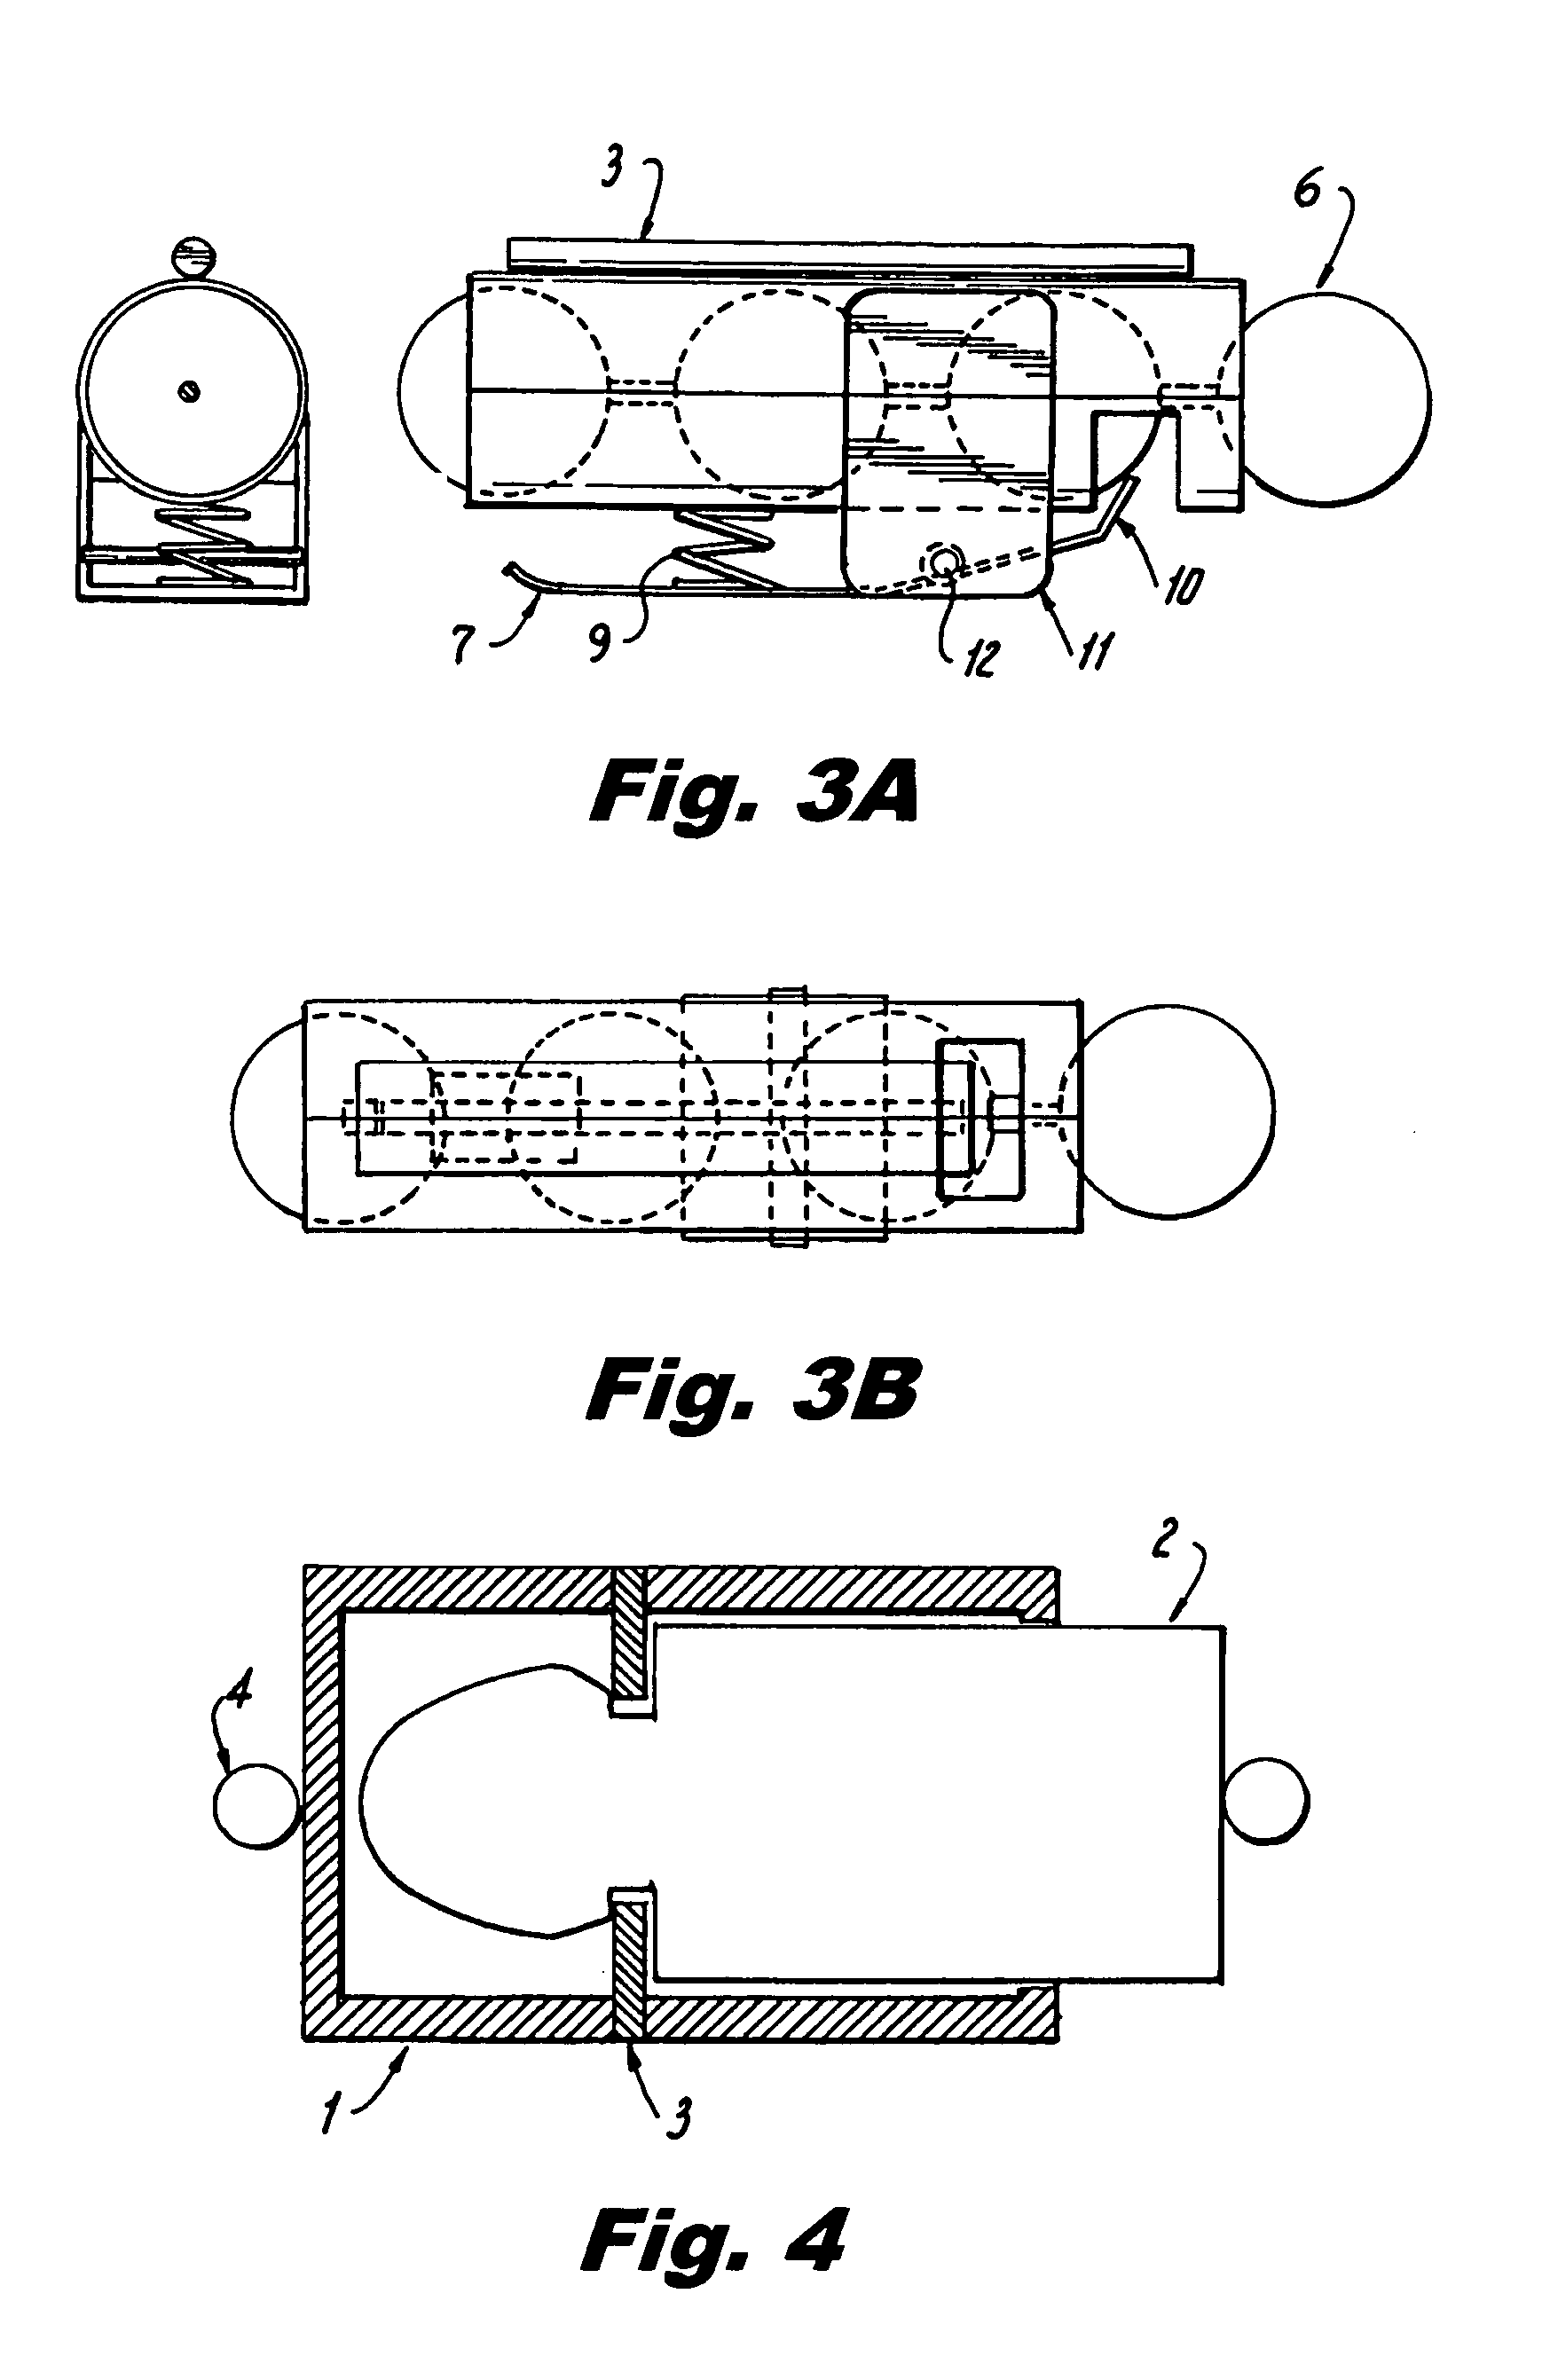 Internal retraction systems and devices